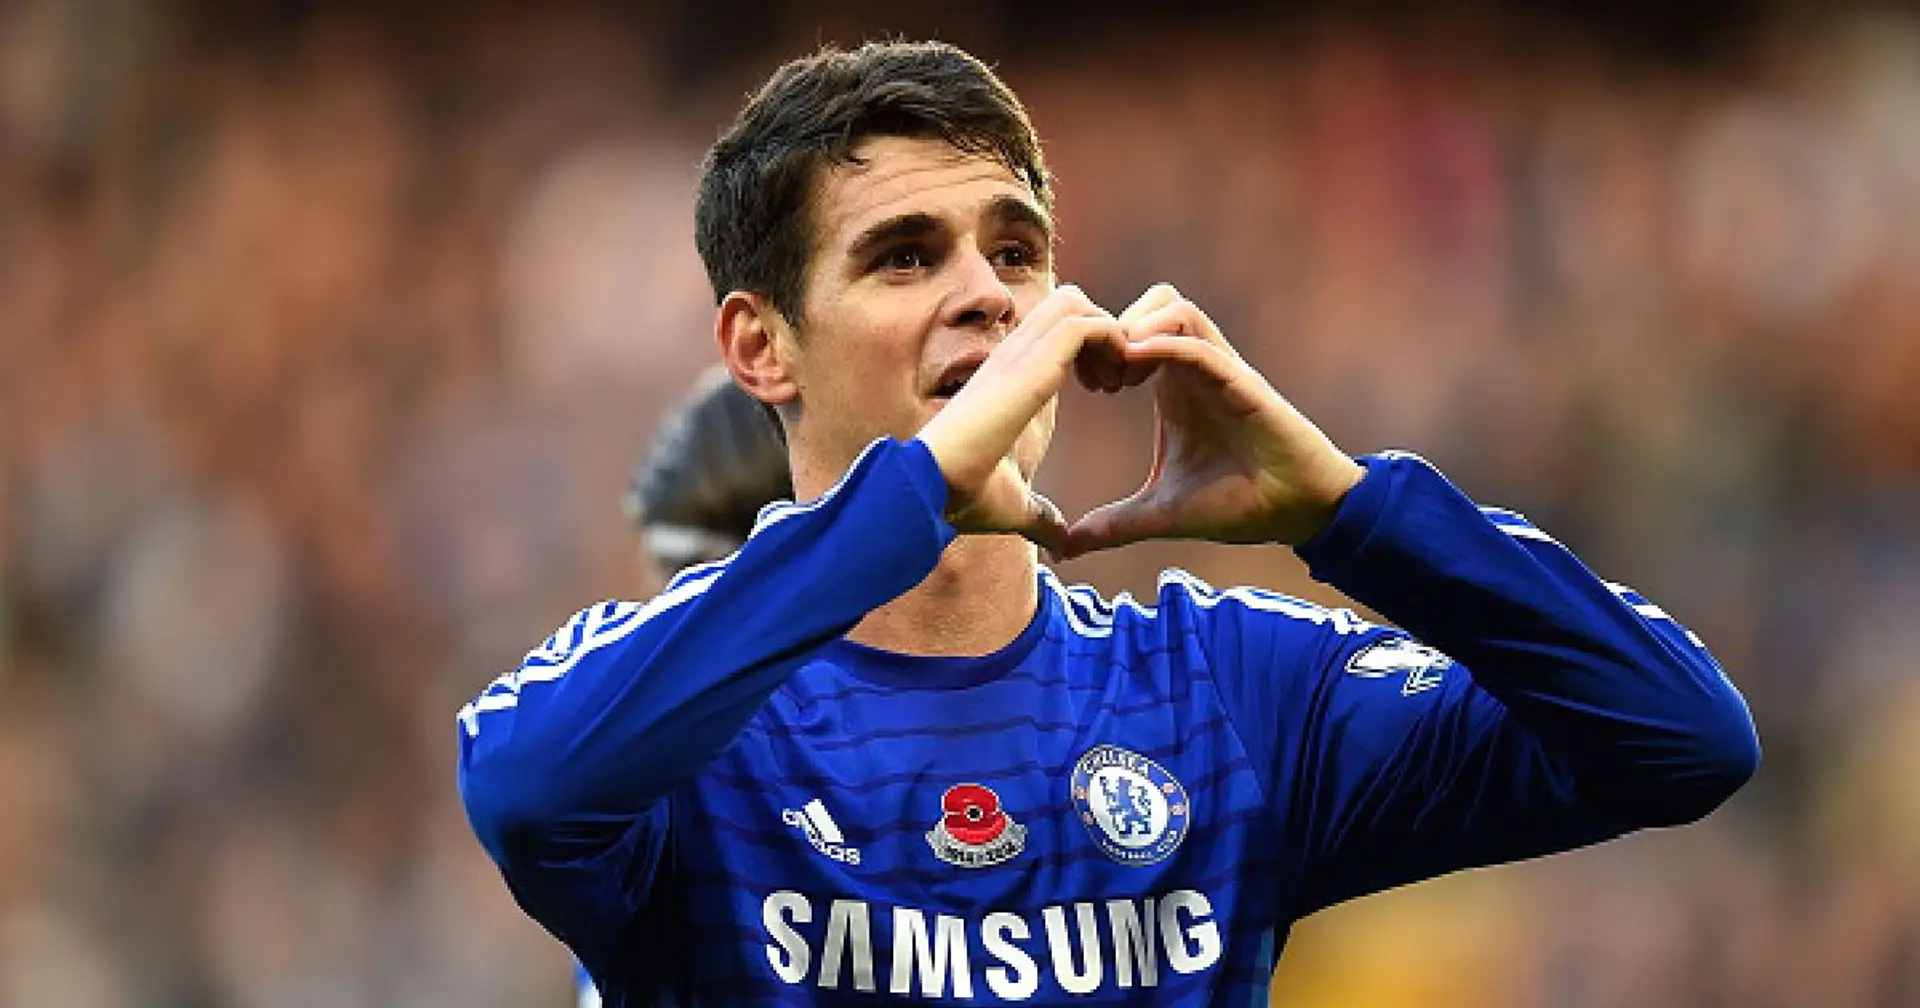 'This would go against all I’ve achieved so far': One wish Oscar failed to keep for Chelsea